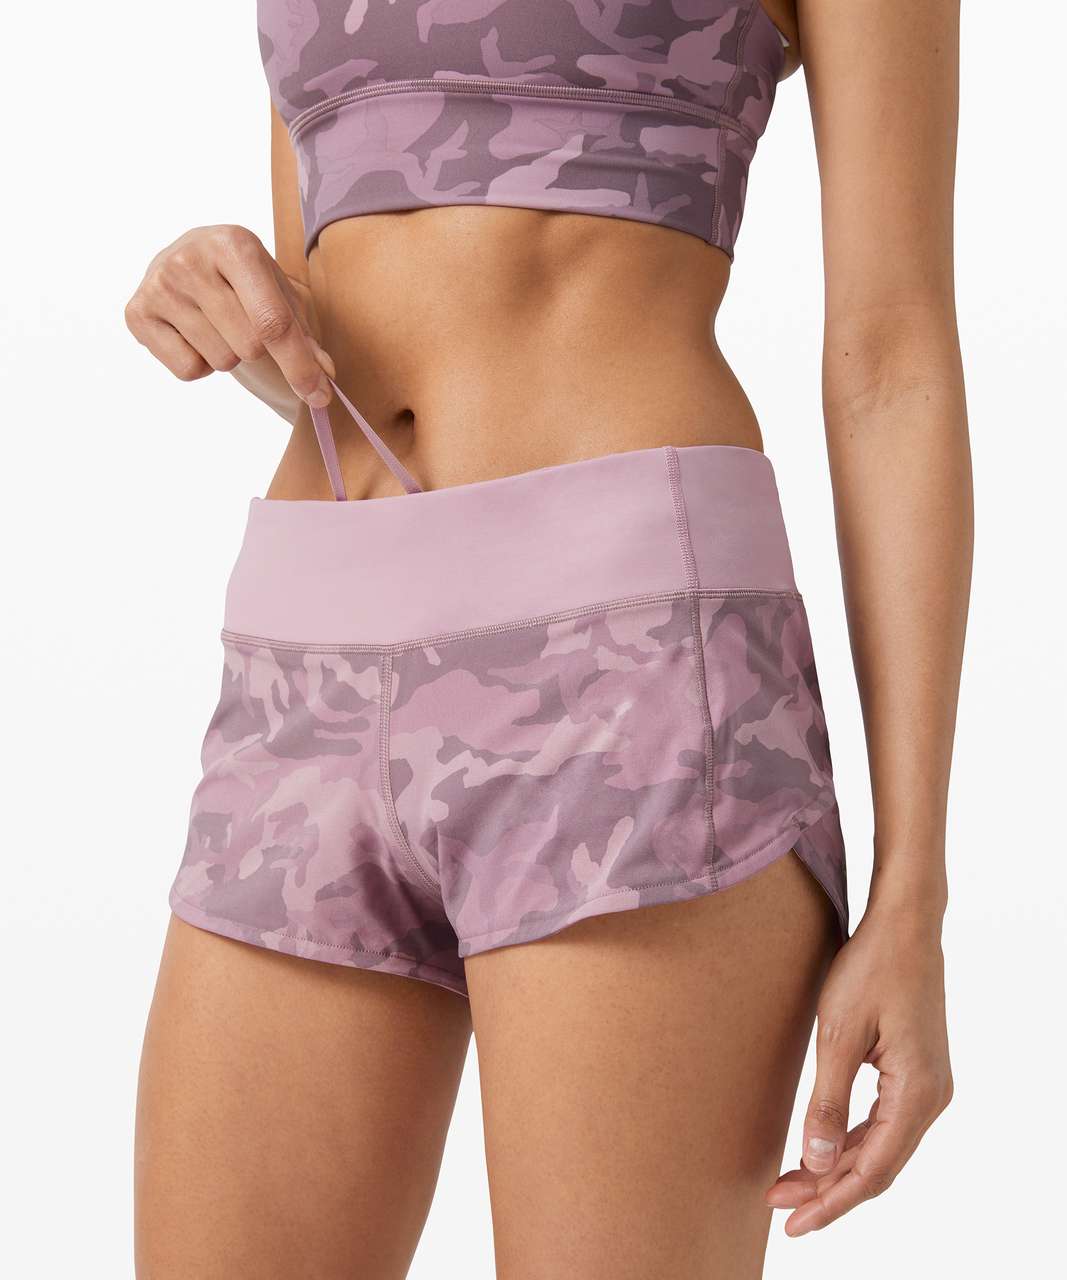 Lululemon Speed Up Short *2.5" - Incognito Camo Pink Taupe Multi / Pink Taupe